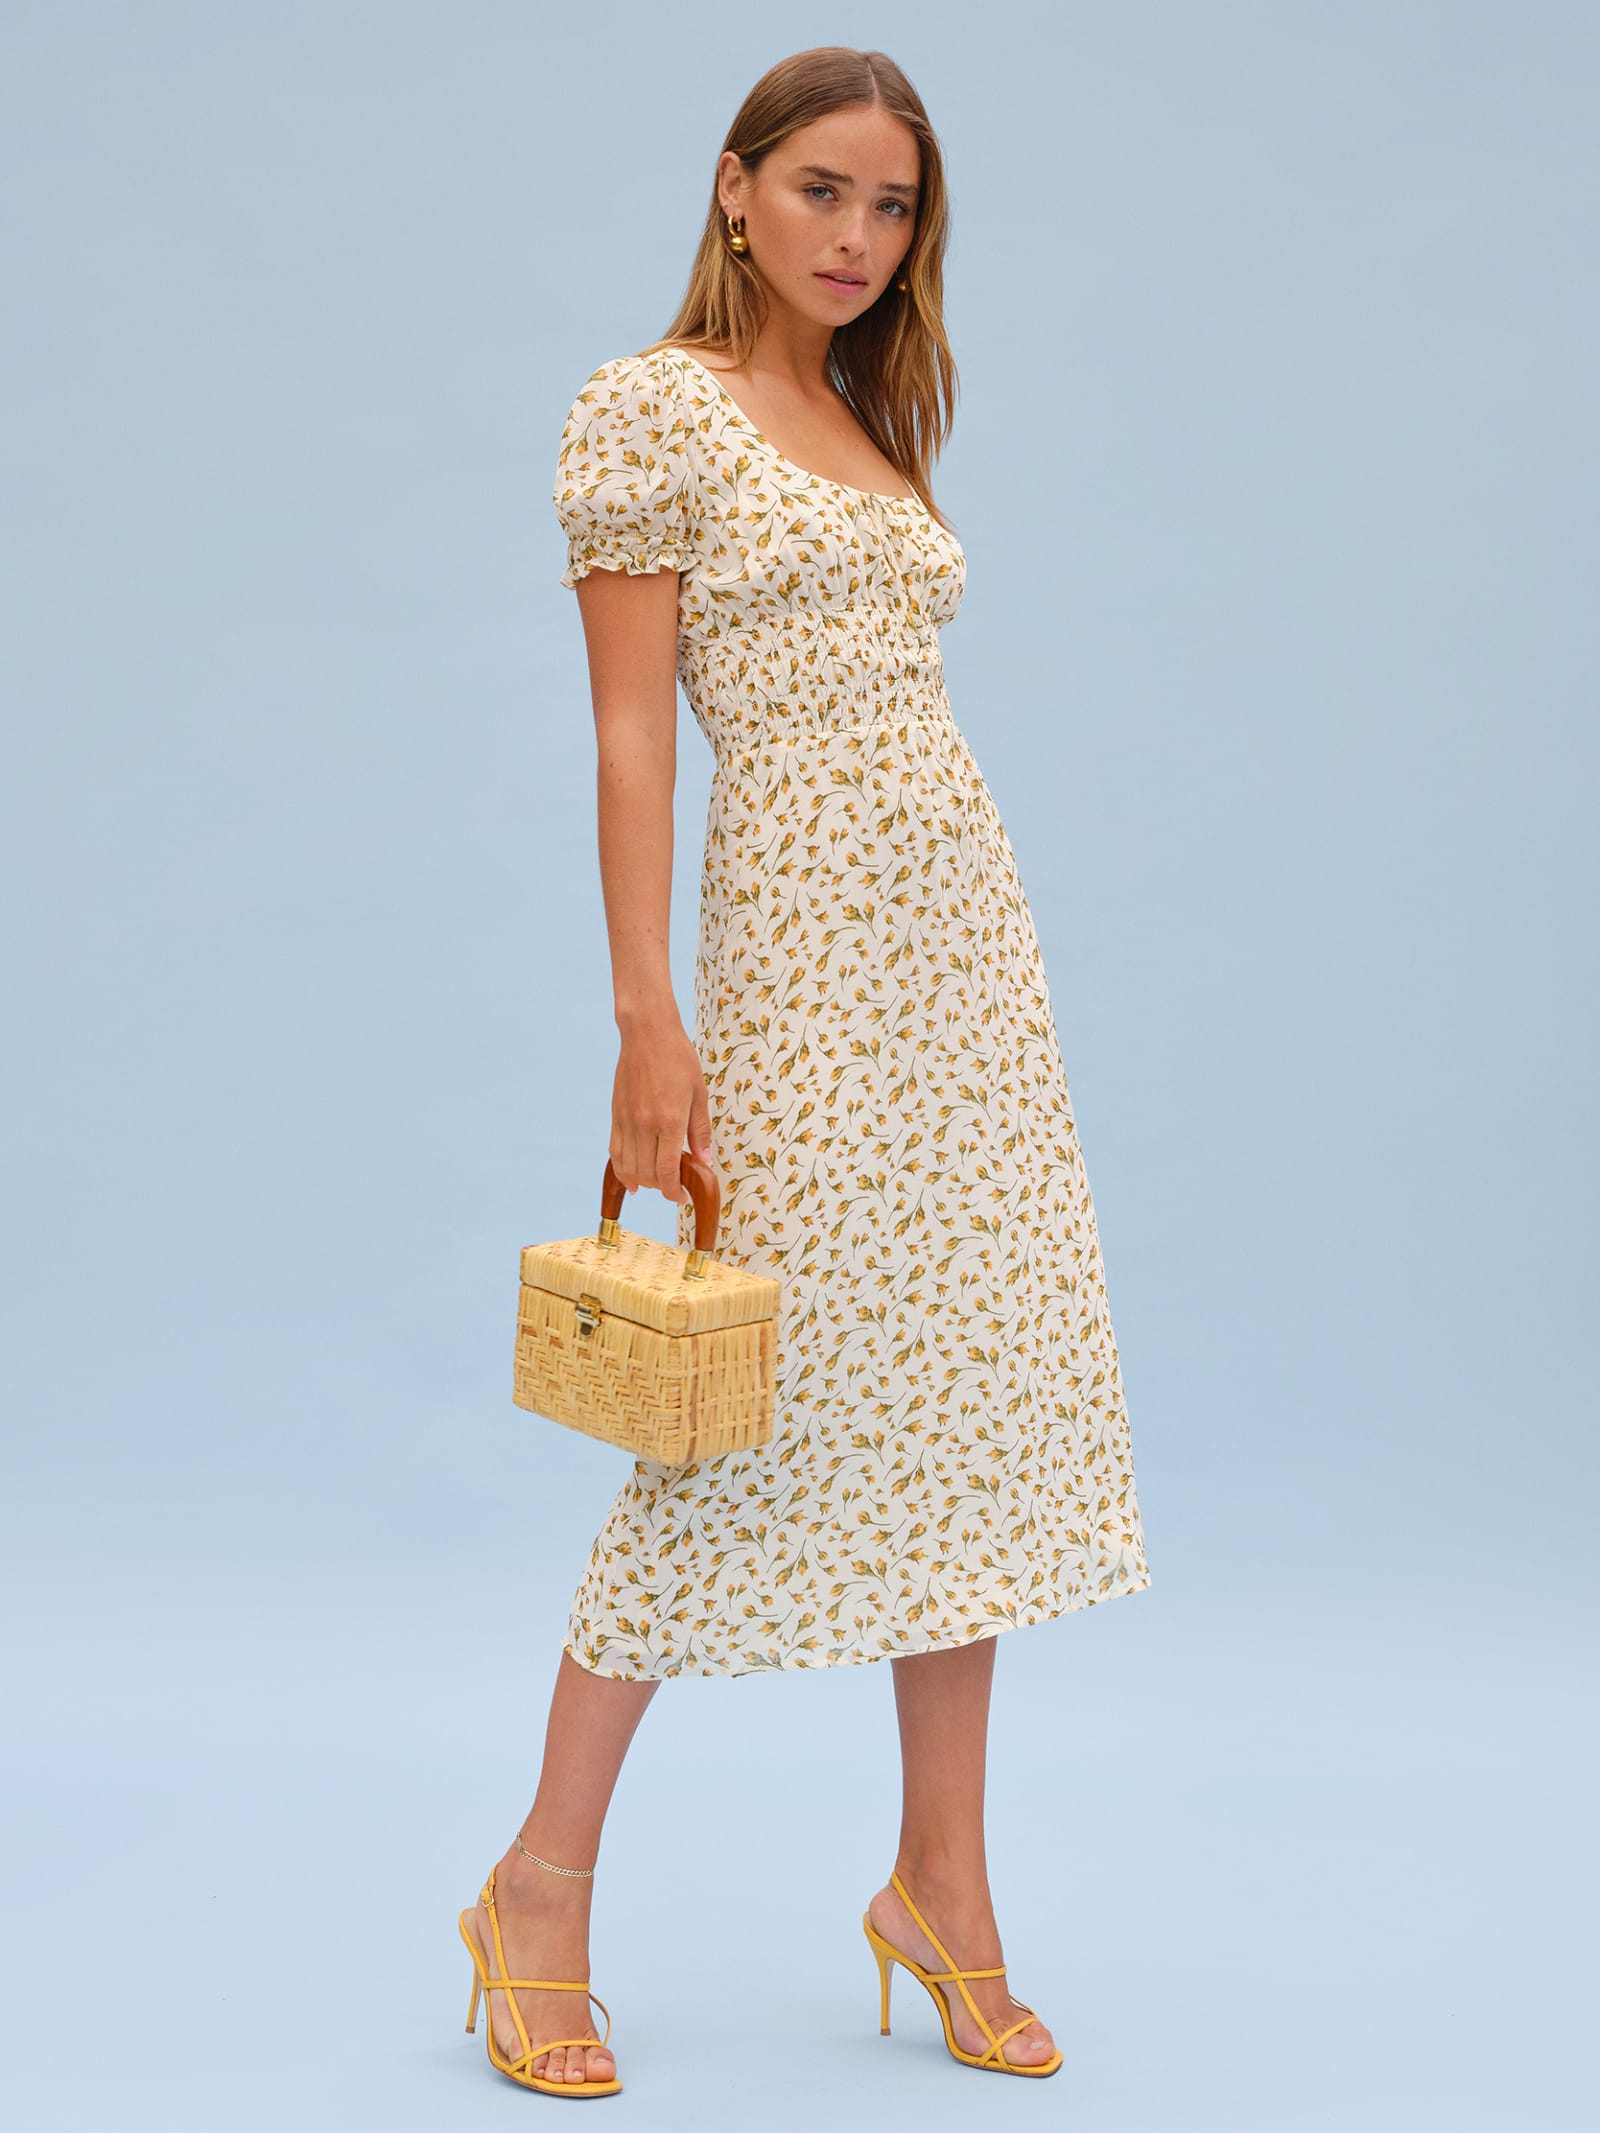 loulou dress reformation